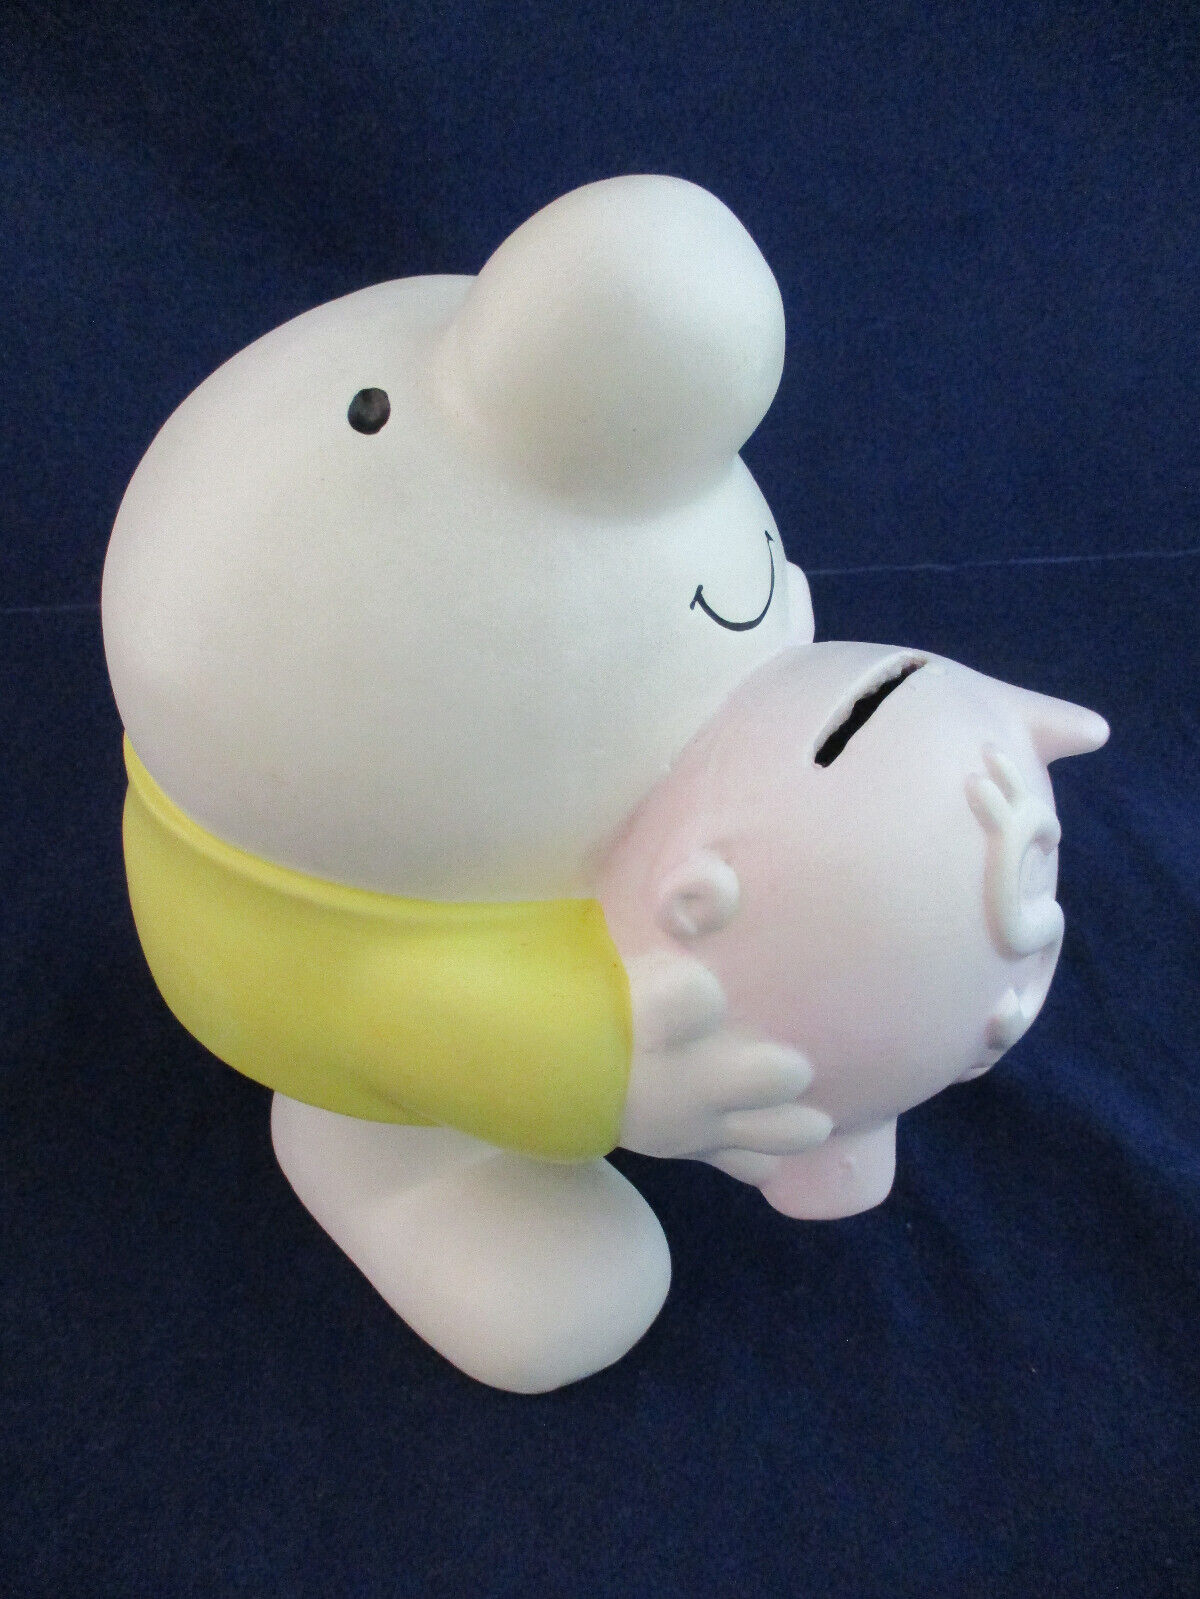 Vtg 1981 Designers Collection Ziggy Earthenware Piggy Coin Bank by Tom Wilson